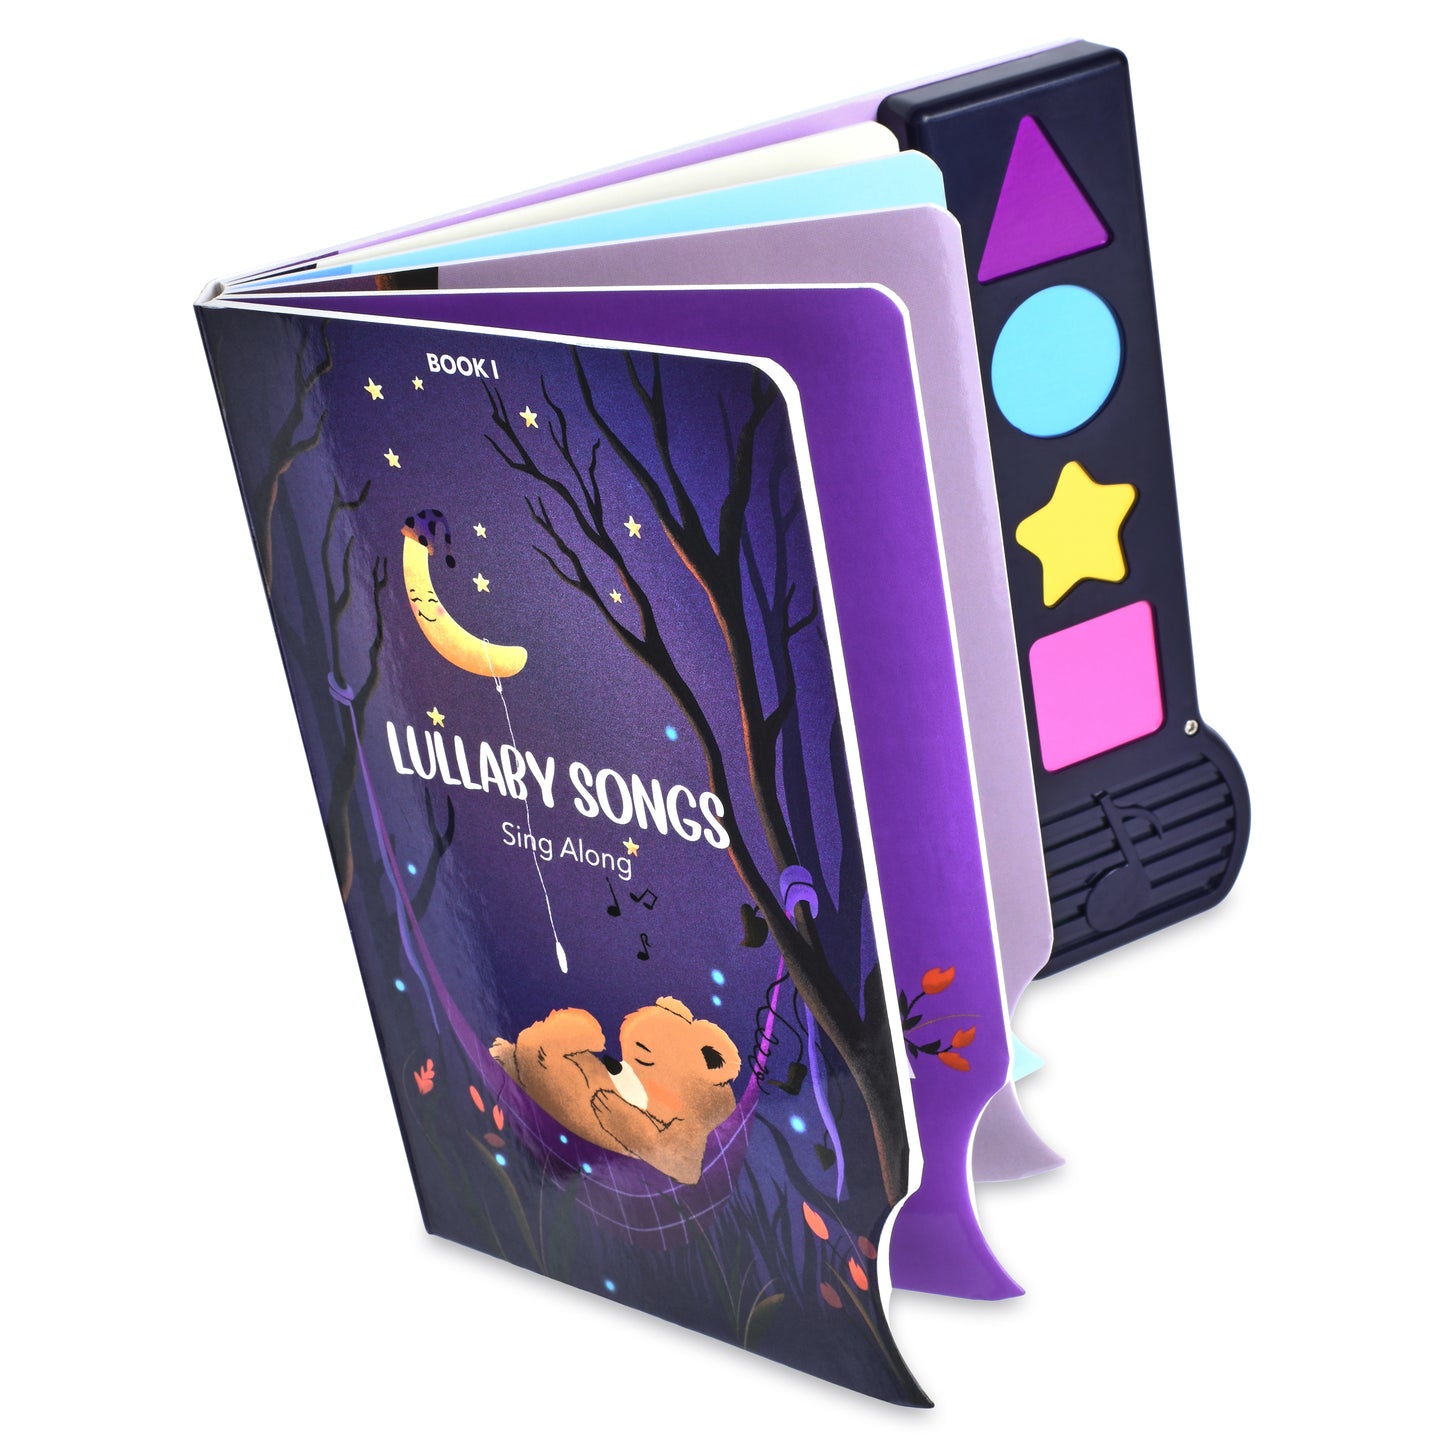 Interactive sound book for children with lullabies